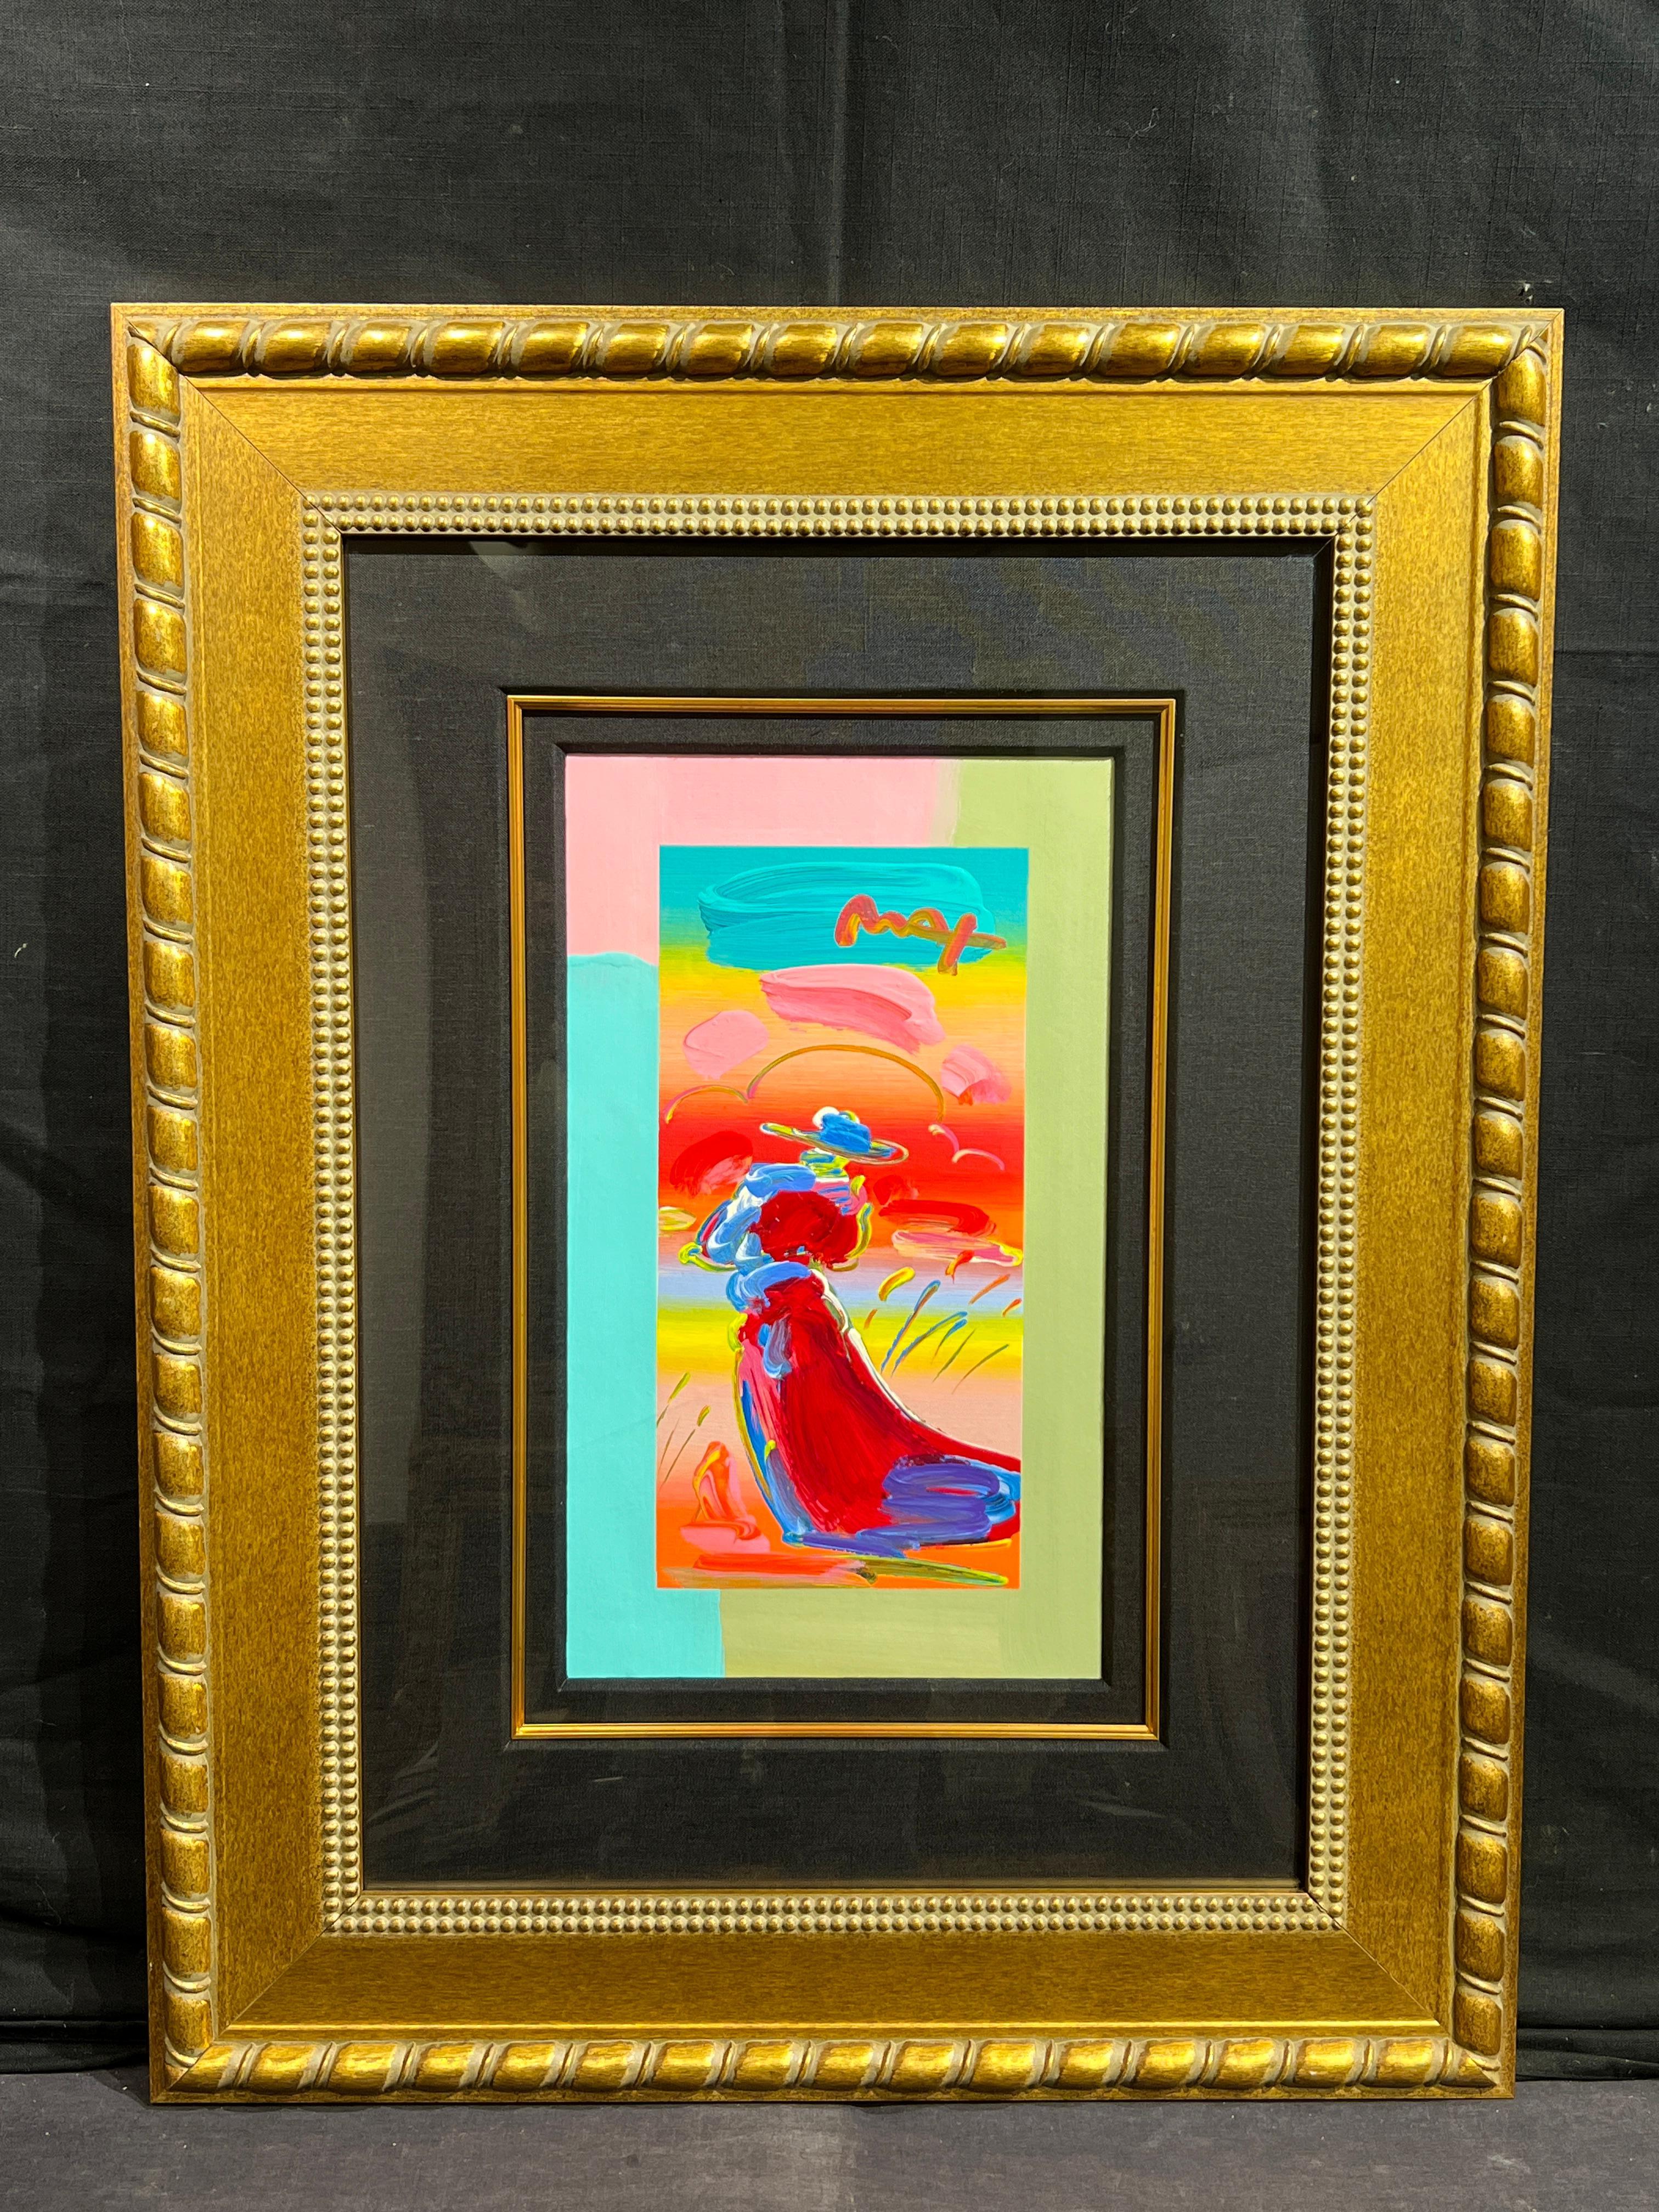 Peter Max (German, b. 1937)
Walking in Reeds, The Sage
Signed Upper Right
17 x 10 inches
33 x 26 inches with frame

Peter Max, born Peter Max Finkelstein,  is a multi-dimensional artist focused on contemporary events.  When he left art school in the